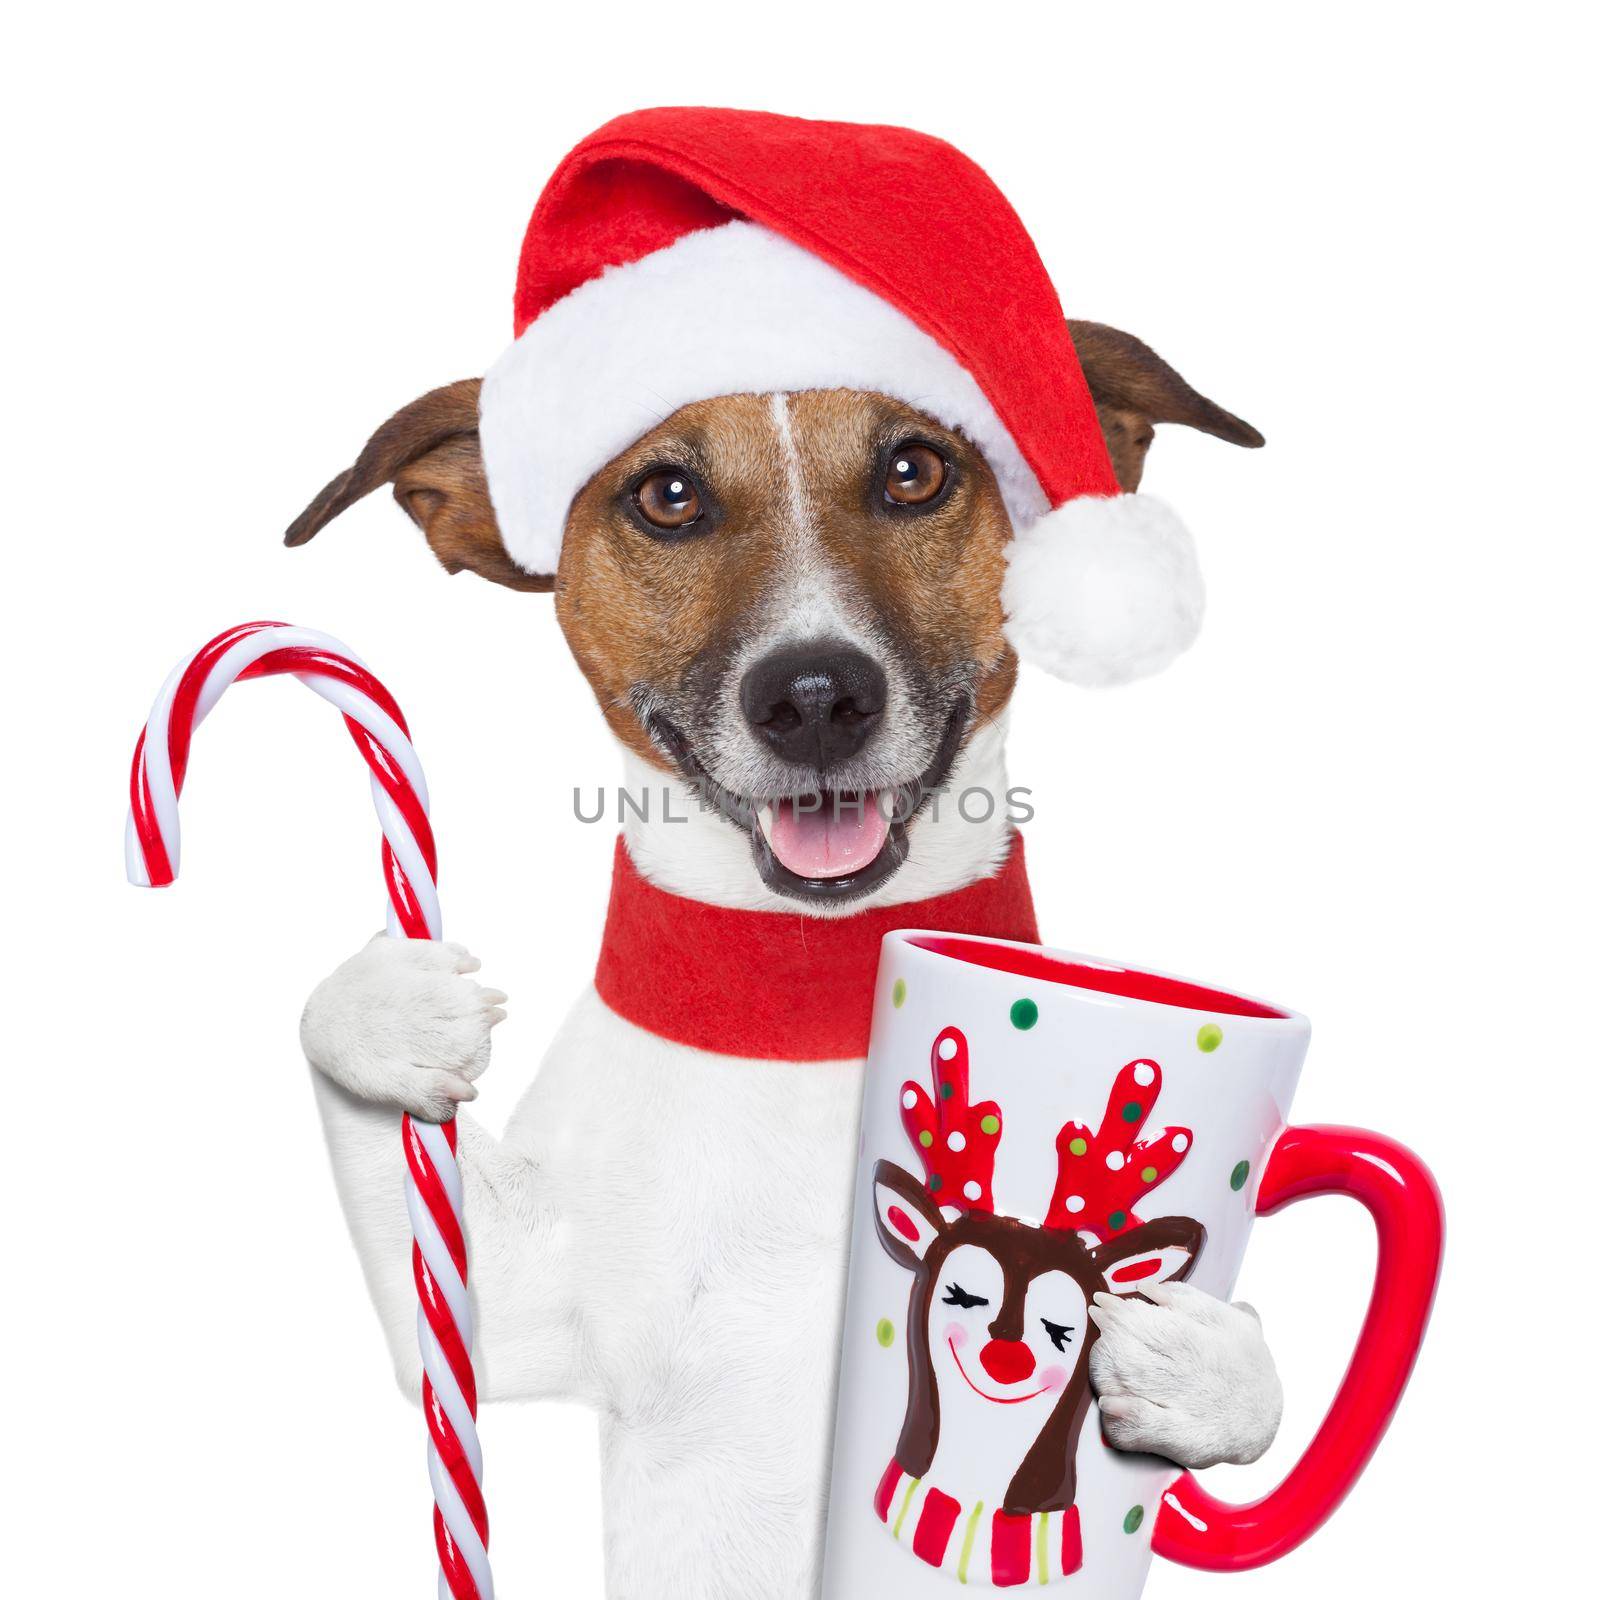 xmas dog with cup and candy cane by Brosch